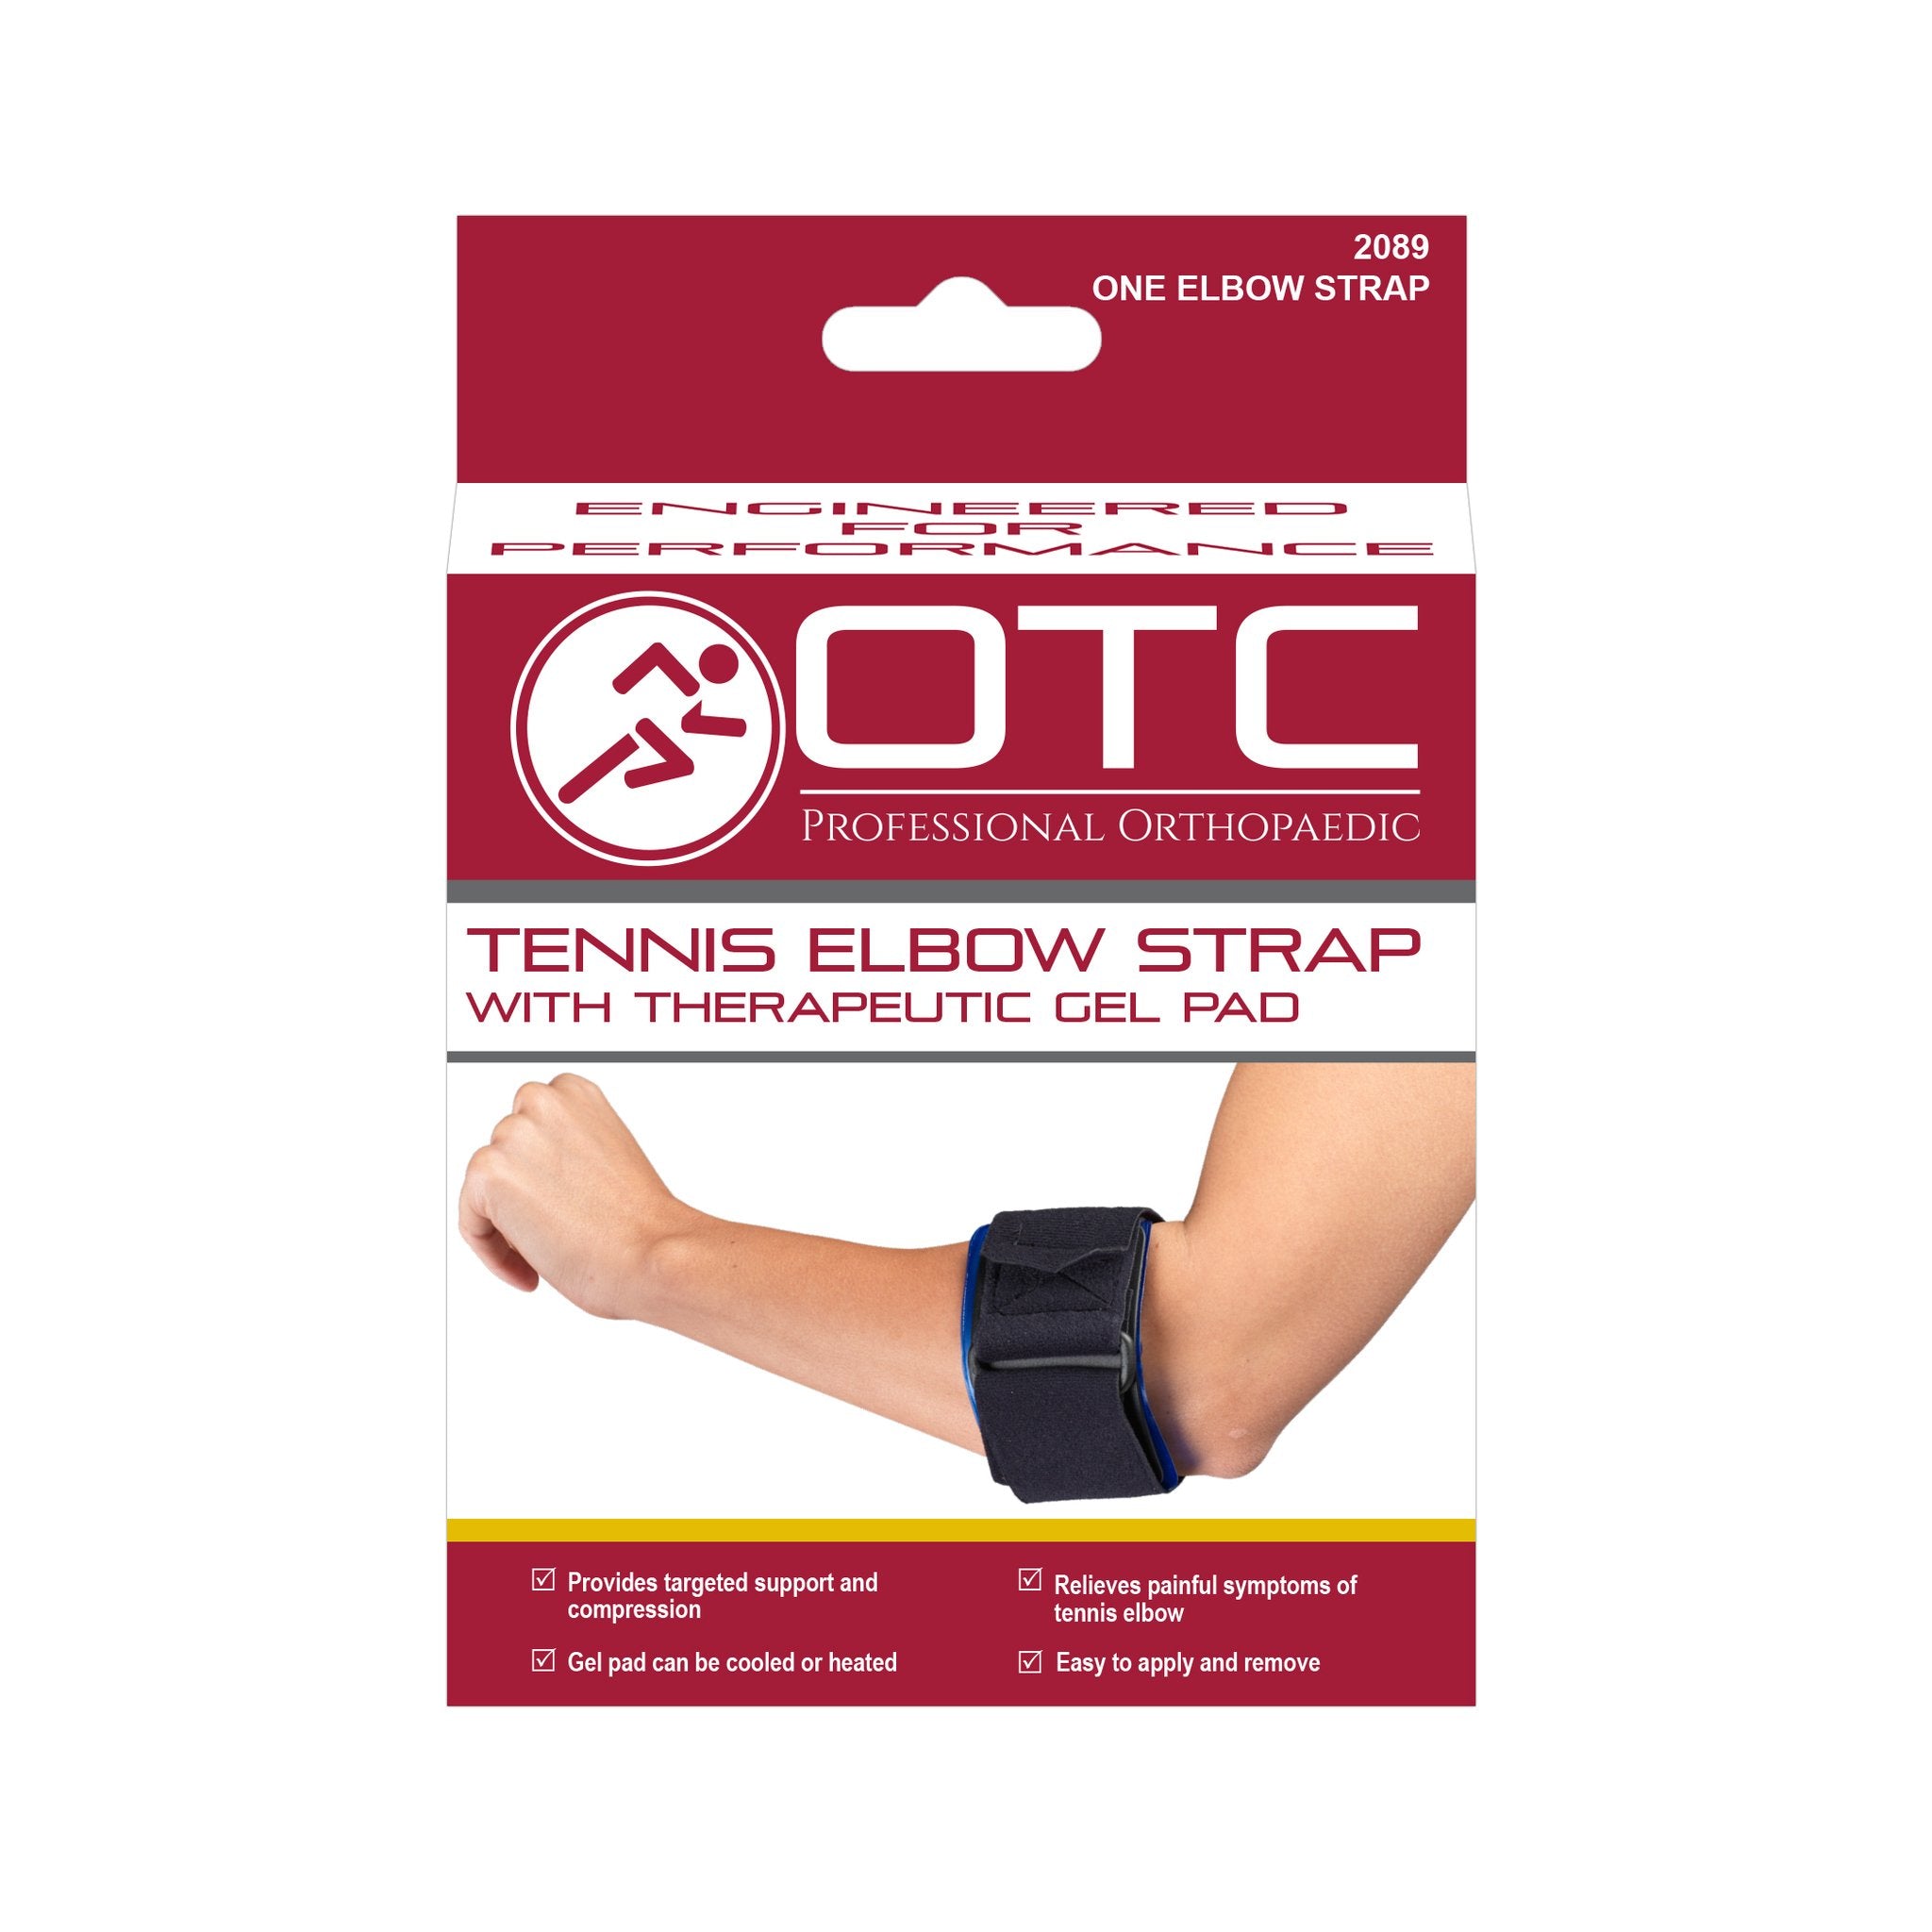 SAI TENNIS ELBOW STRAP WITH THERAPEUTIC GEL PAD